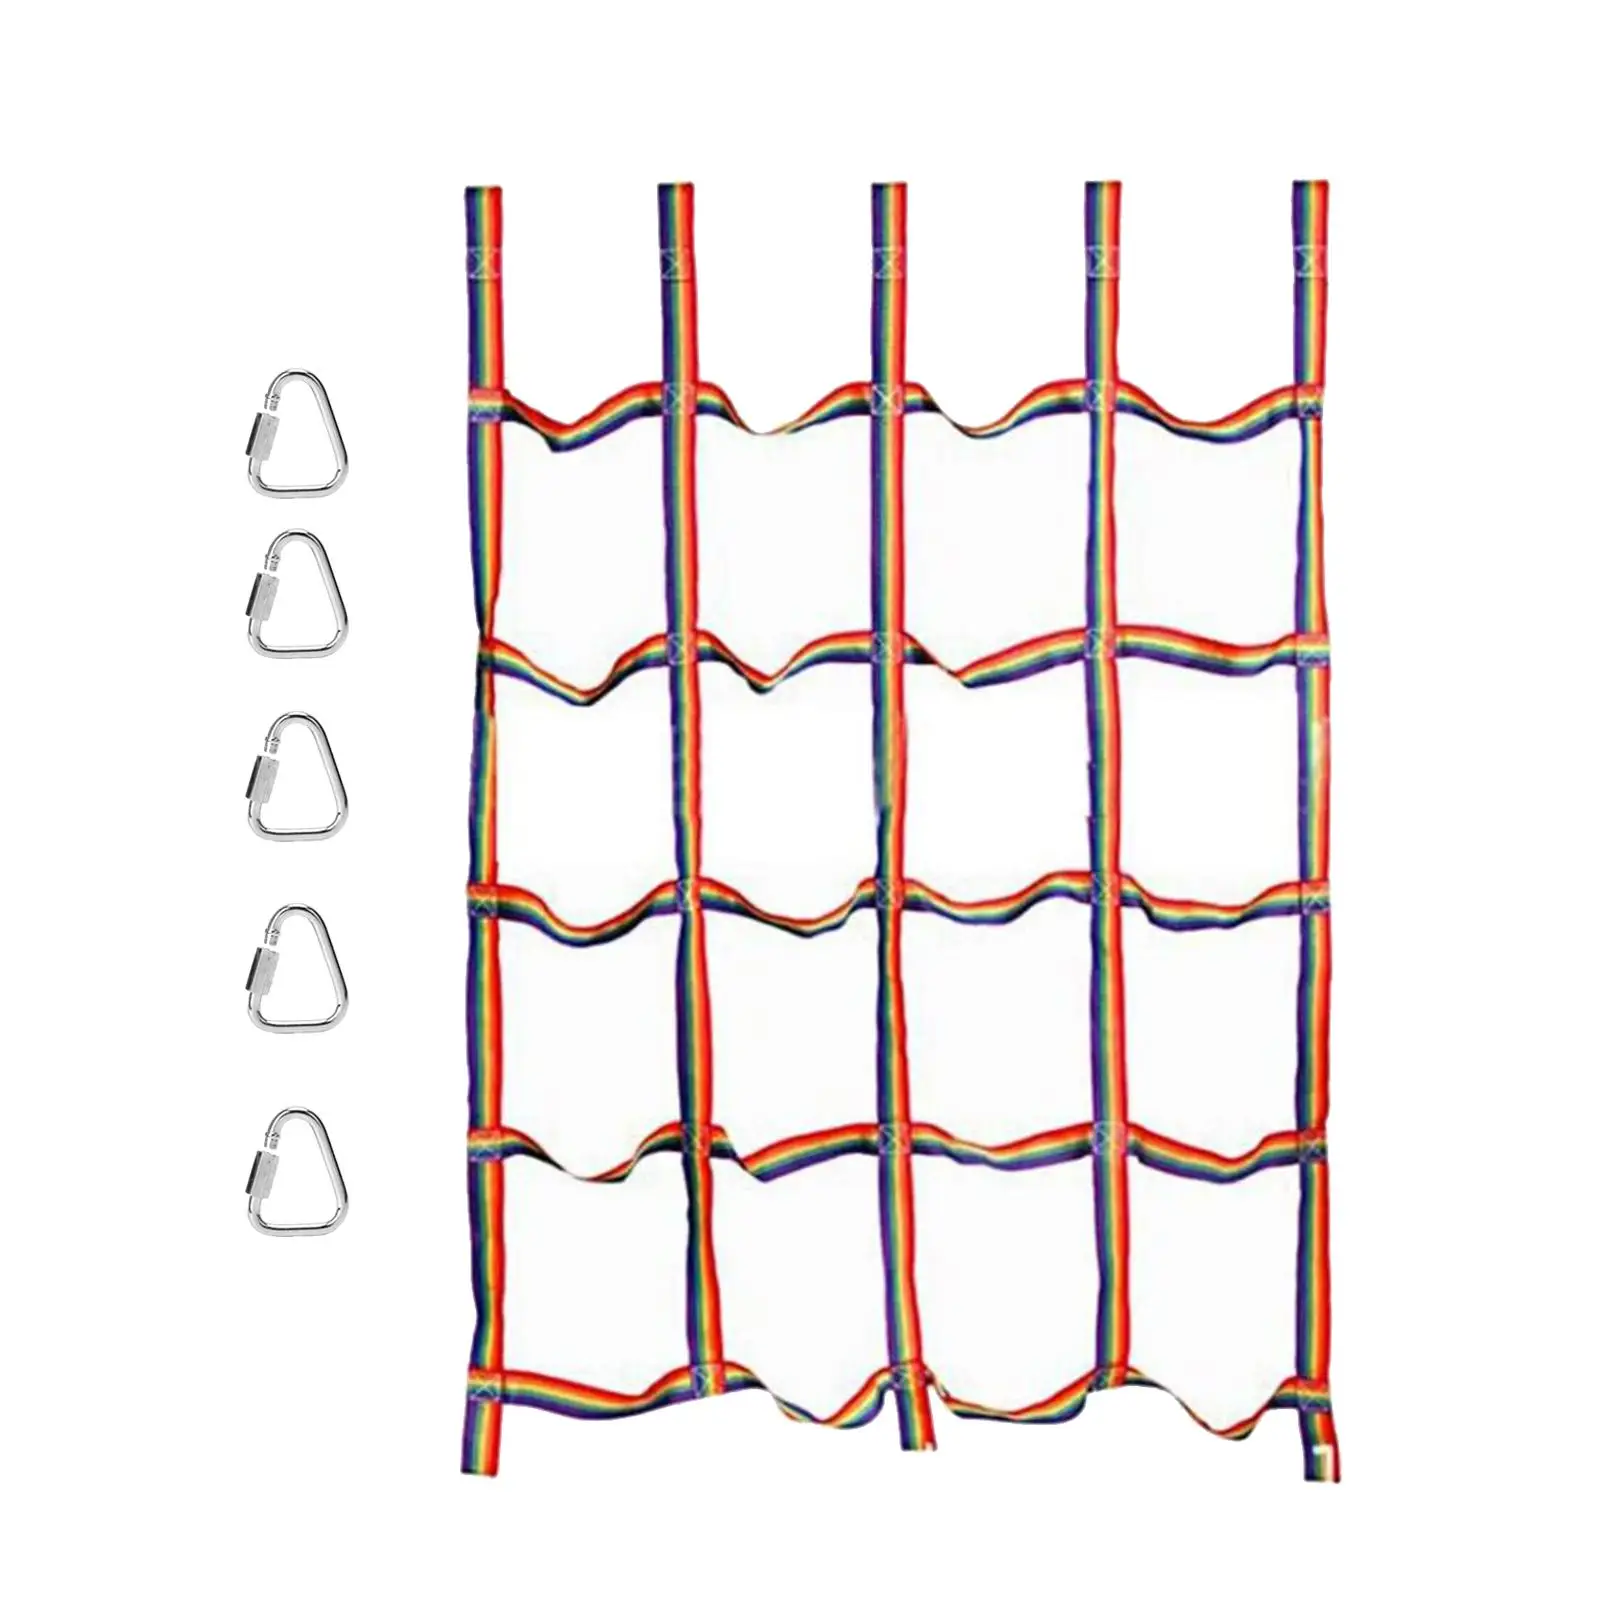 Children Climbing Cargo Net for Jungle Gyms Outdoor Treehouse 250KG Capacity